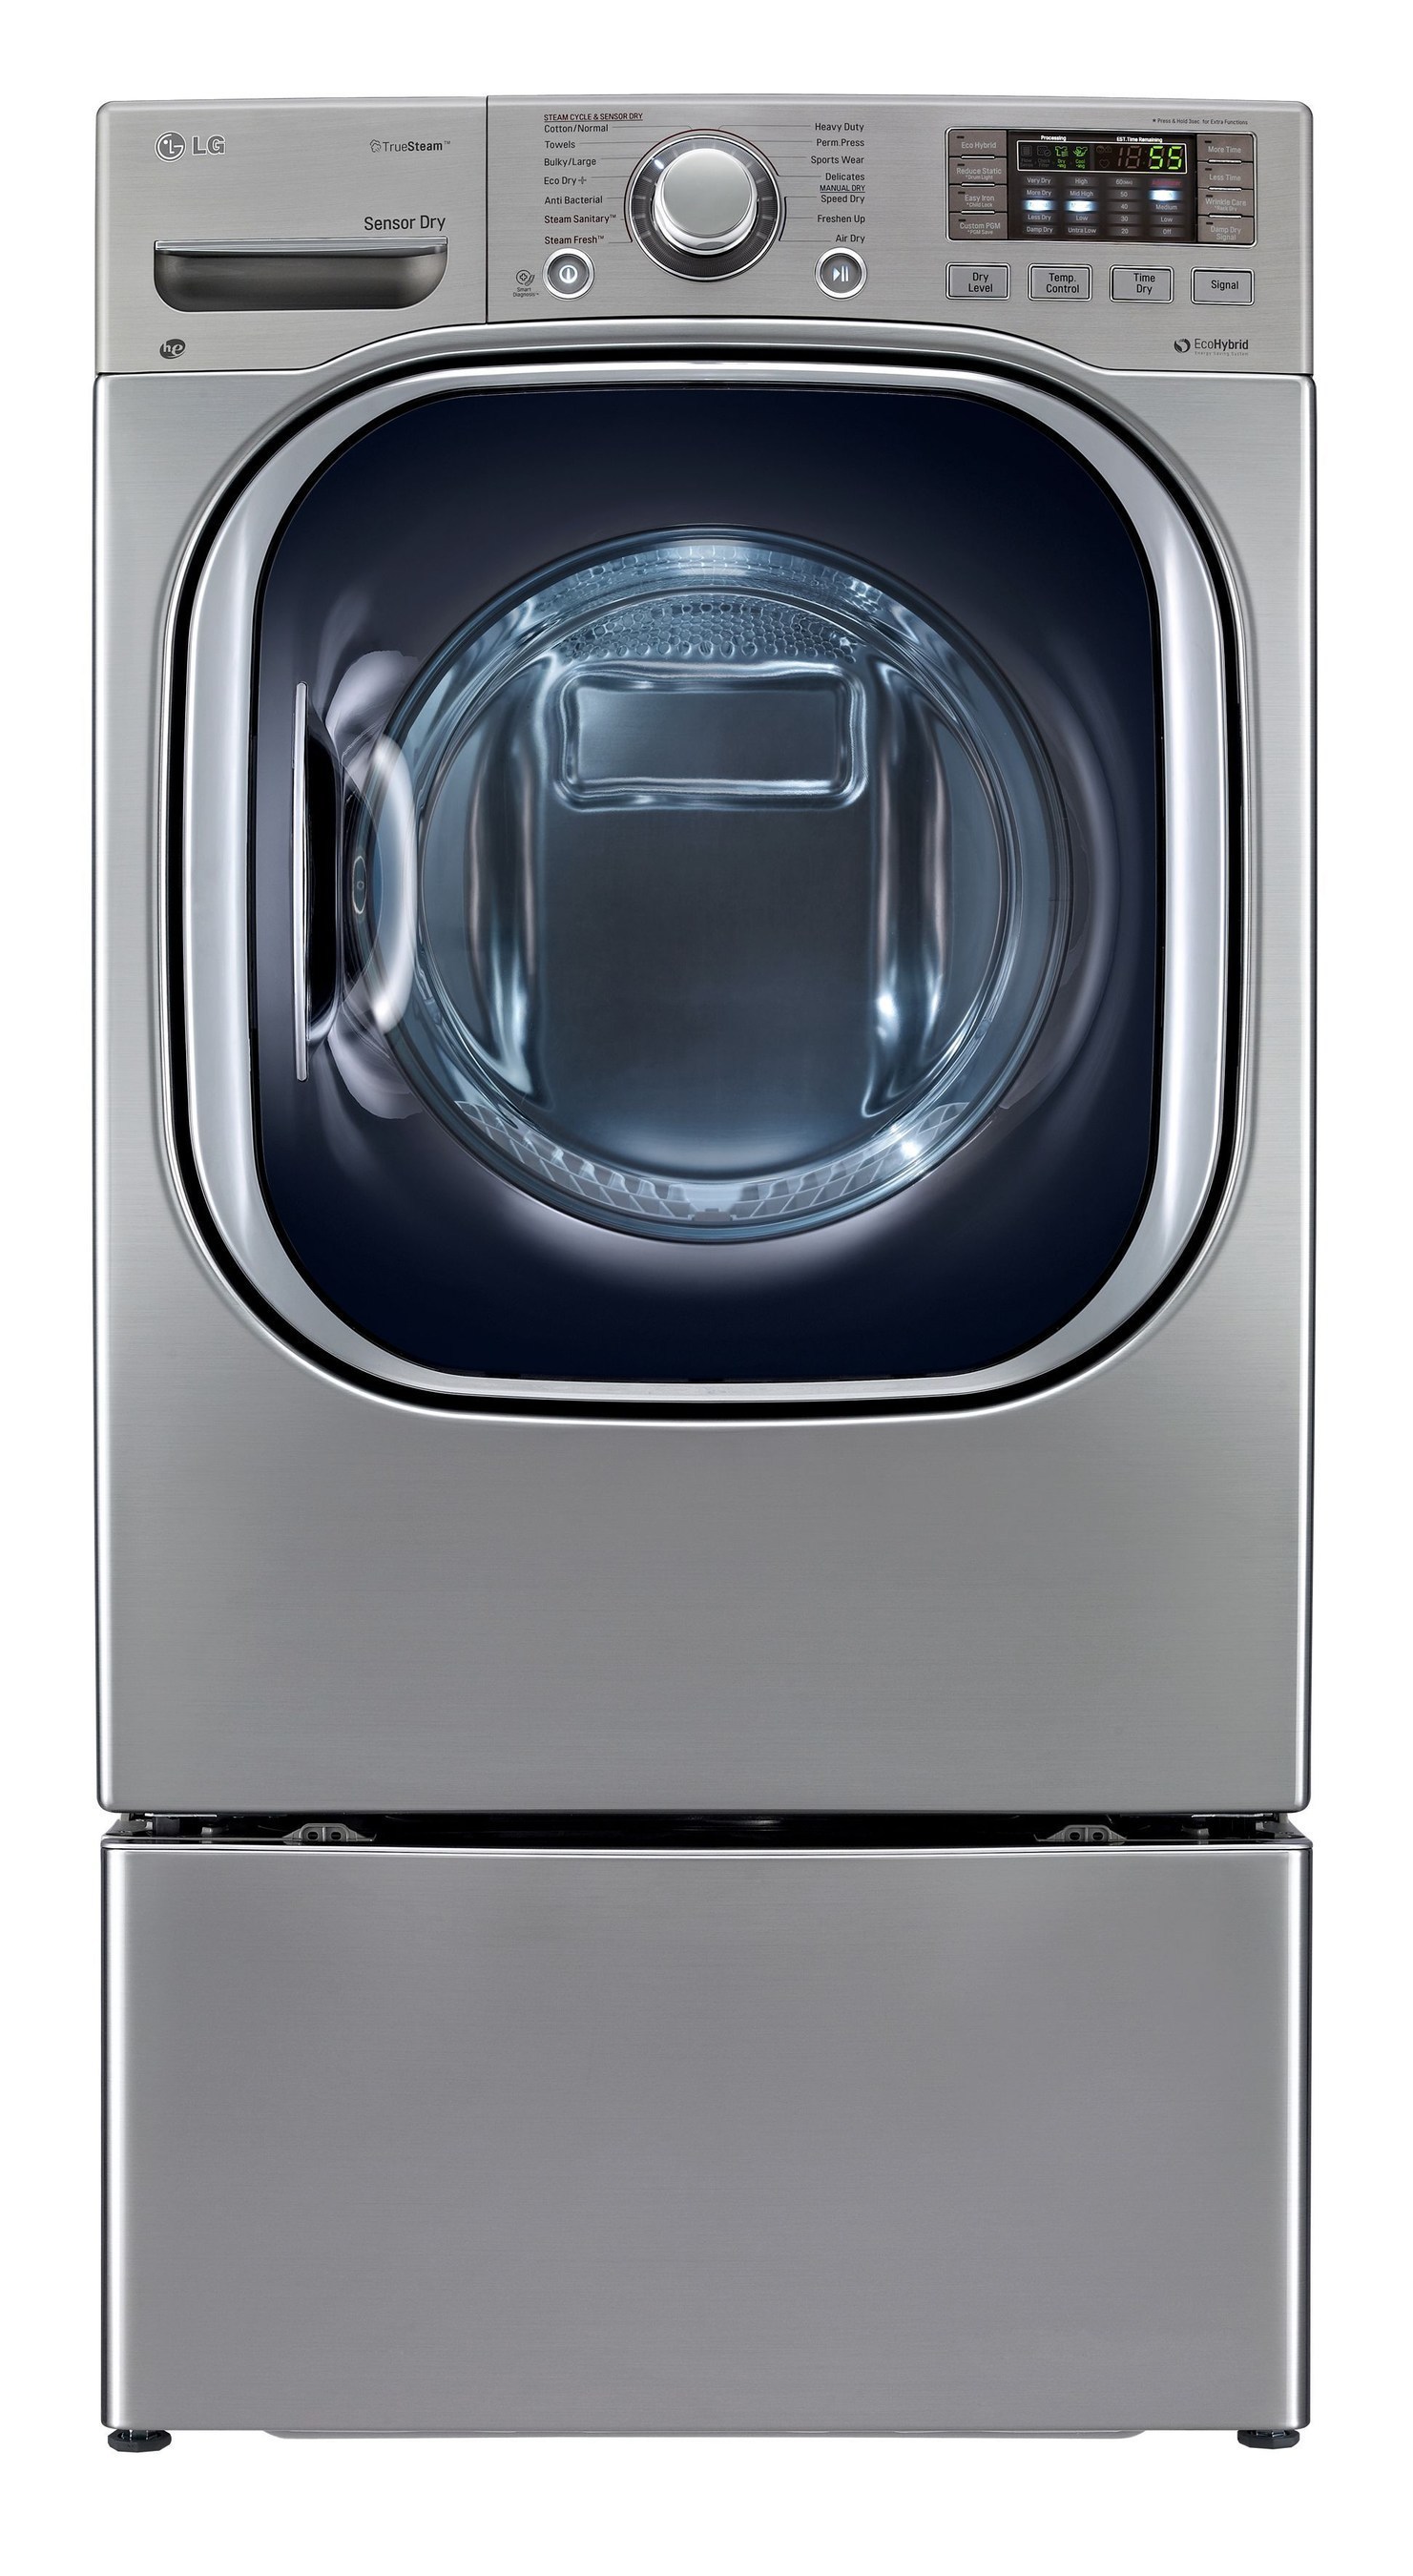 LG's EcoHybrid(TM) Dryer was named a 2015 CES Innovation Awards Honoree in the Home Appliances category.